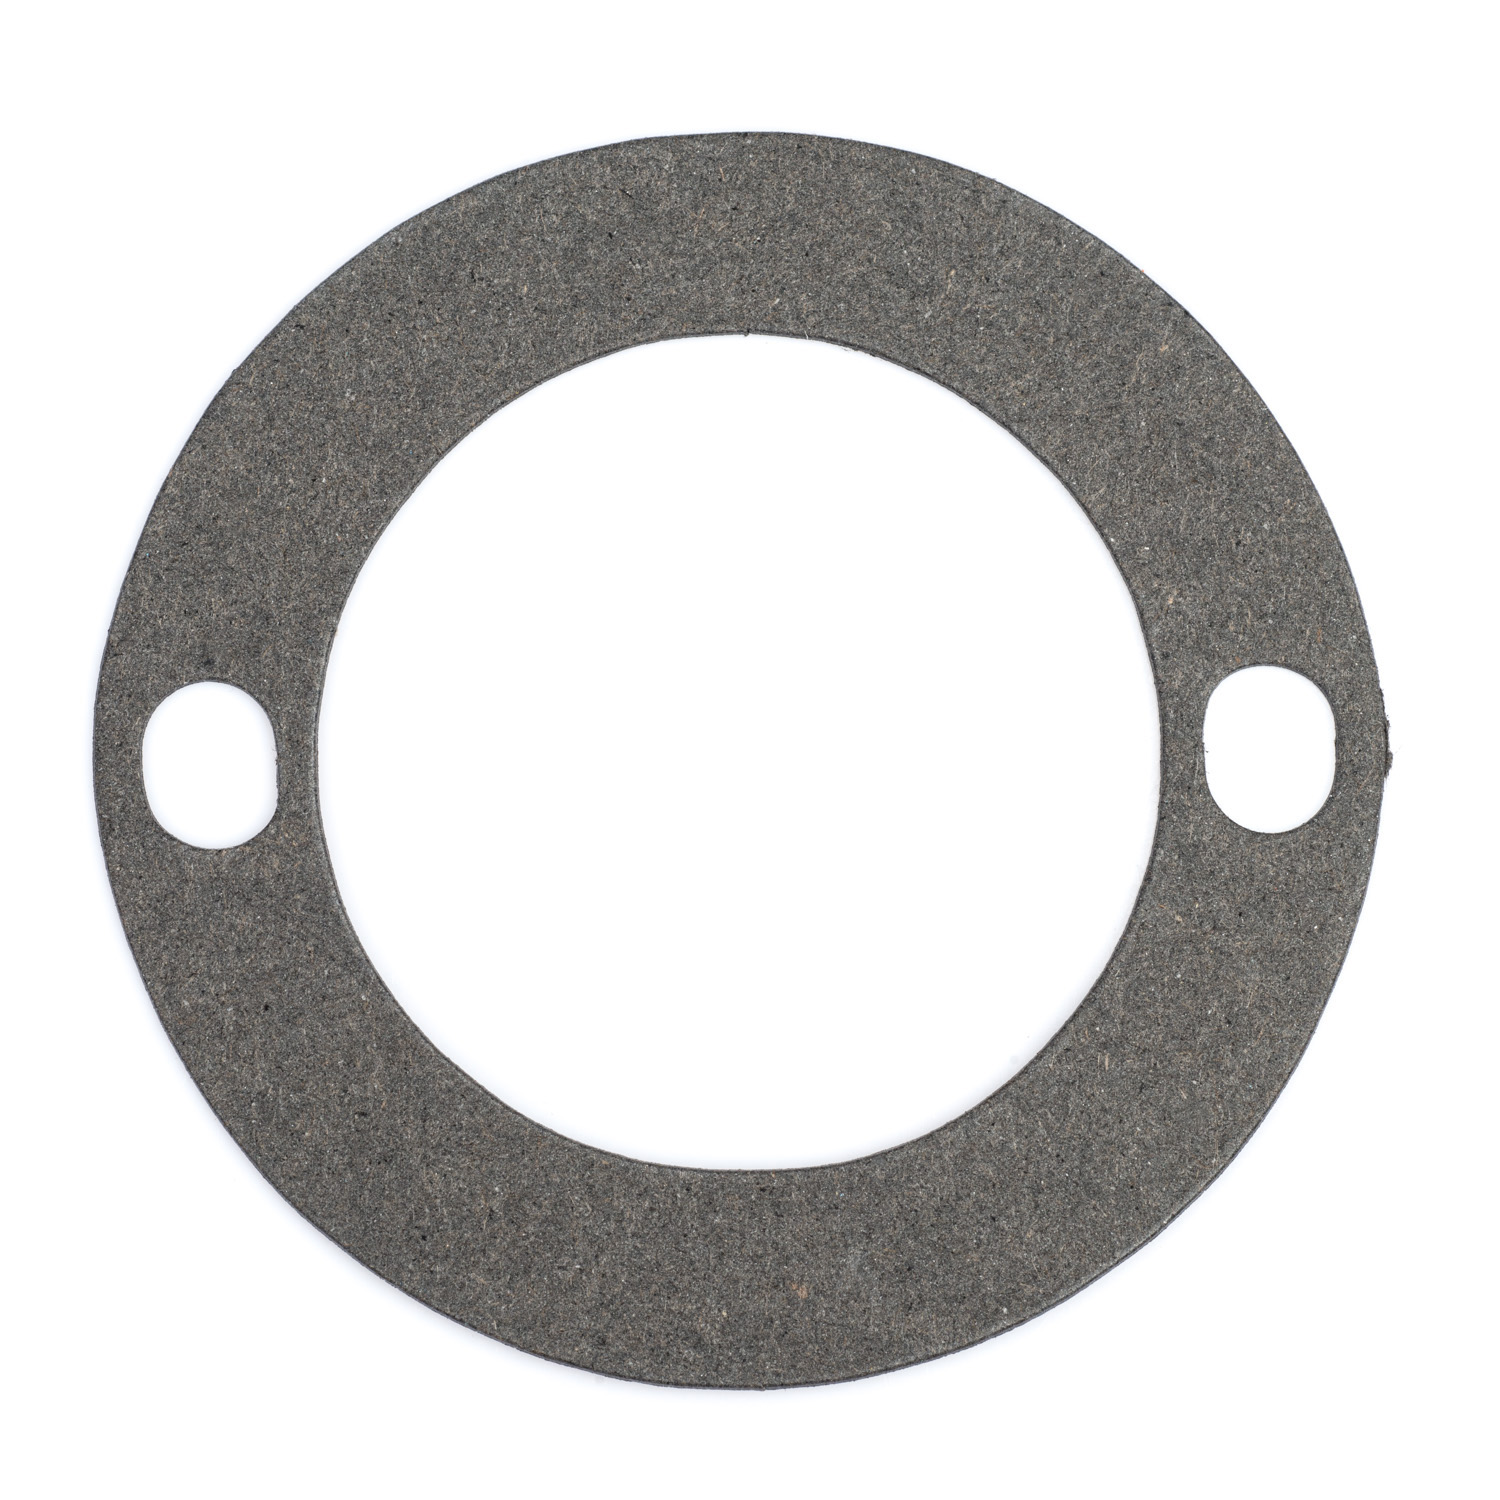 XS1B Oil Filter Strainer Cover Gasket